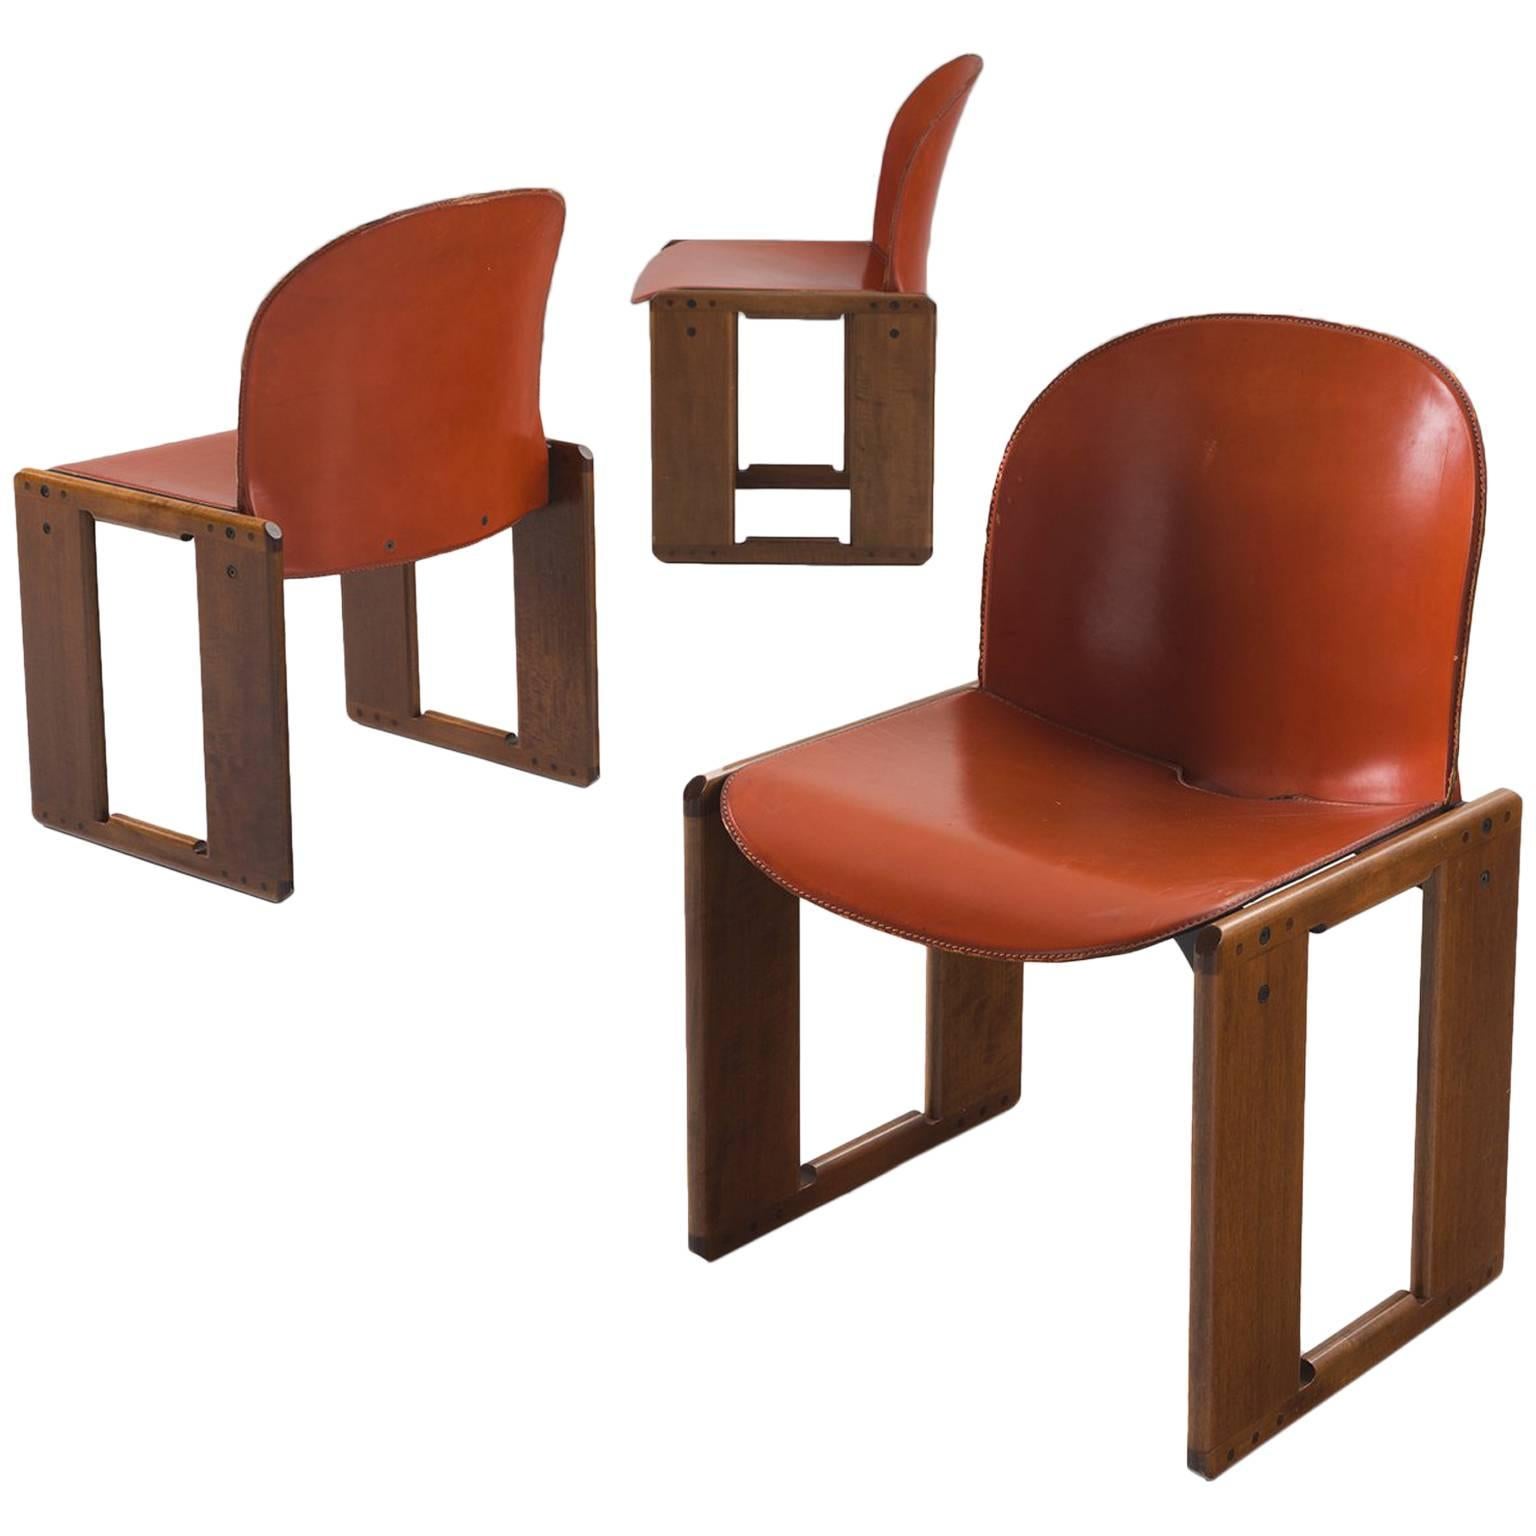 Dining chair by Afra and Tobia Scarpa for B&B Italia, Italy, 1974.

This set of six dining chairs is both slender and firm at the same time. The leather seat and back very thin but strong thanks to the wood that is used to strengthen the chair.